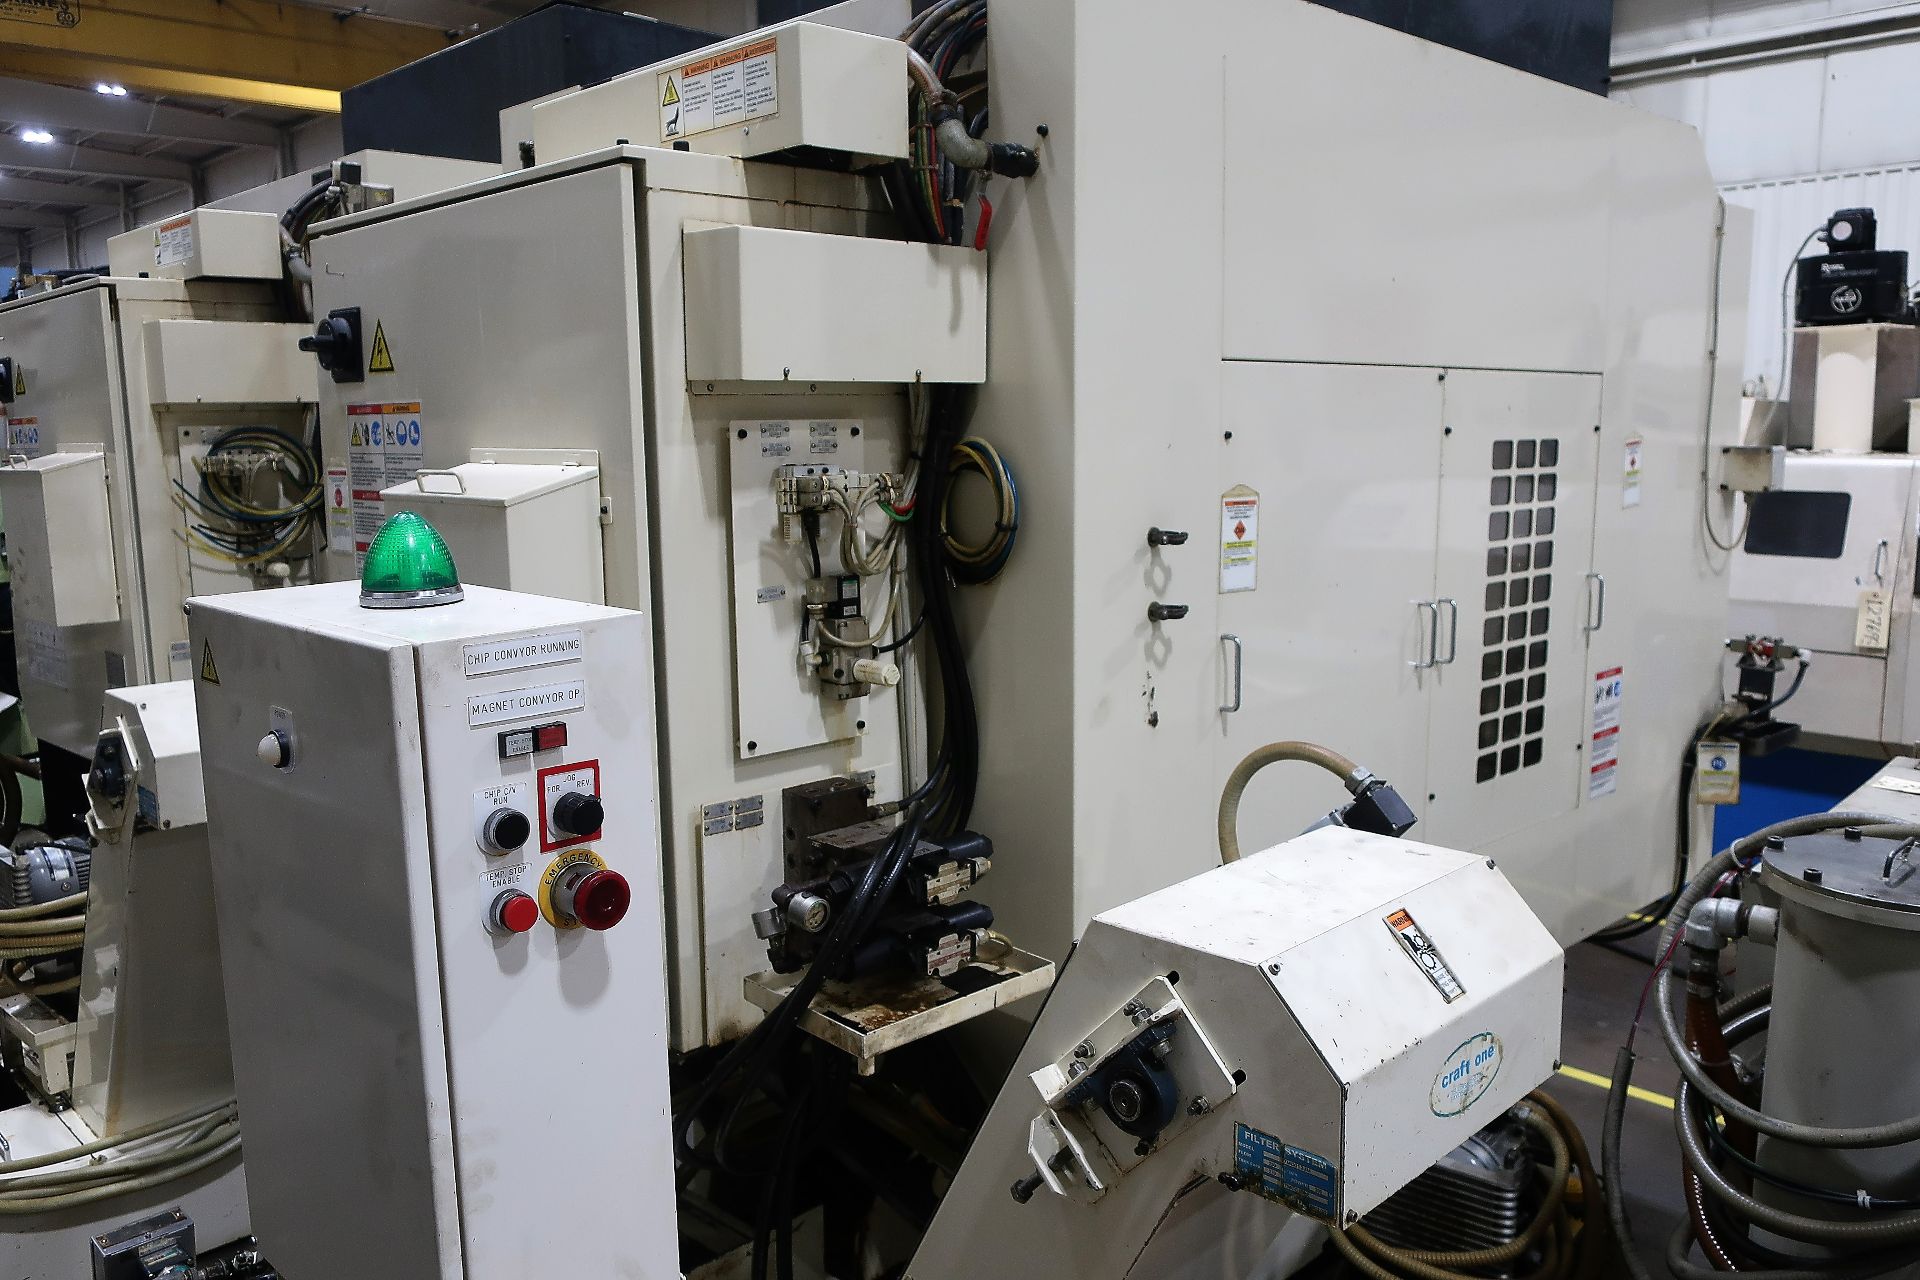 BROTHER TC-R2B CNC DRILL TAP VERTICAL MACHINING CENTER, S/N 111878, NEW 2012 - Image 7 of 9